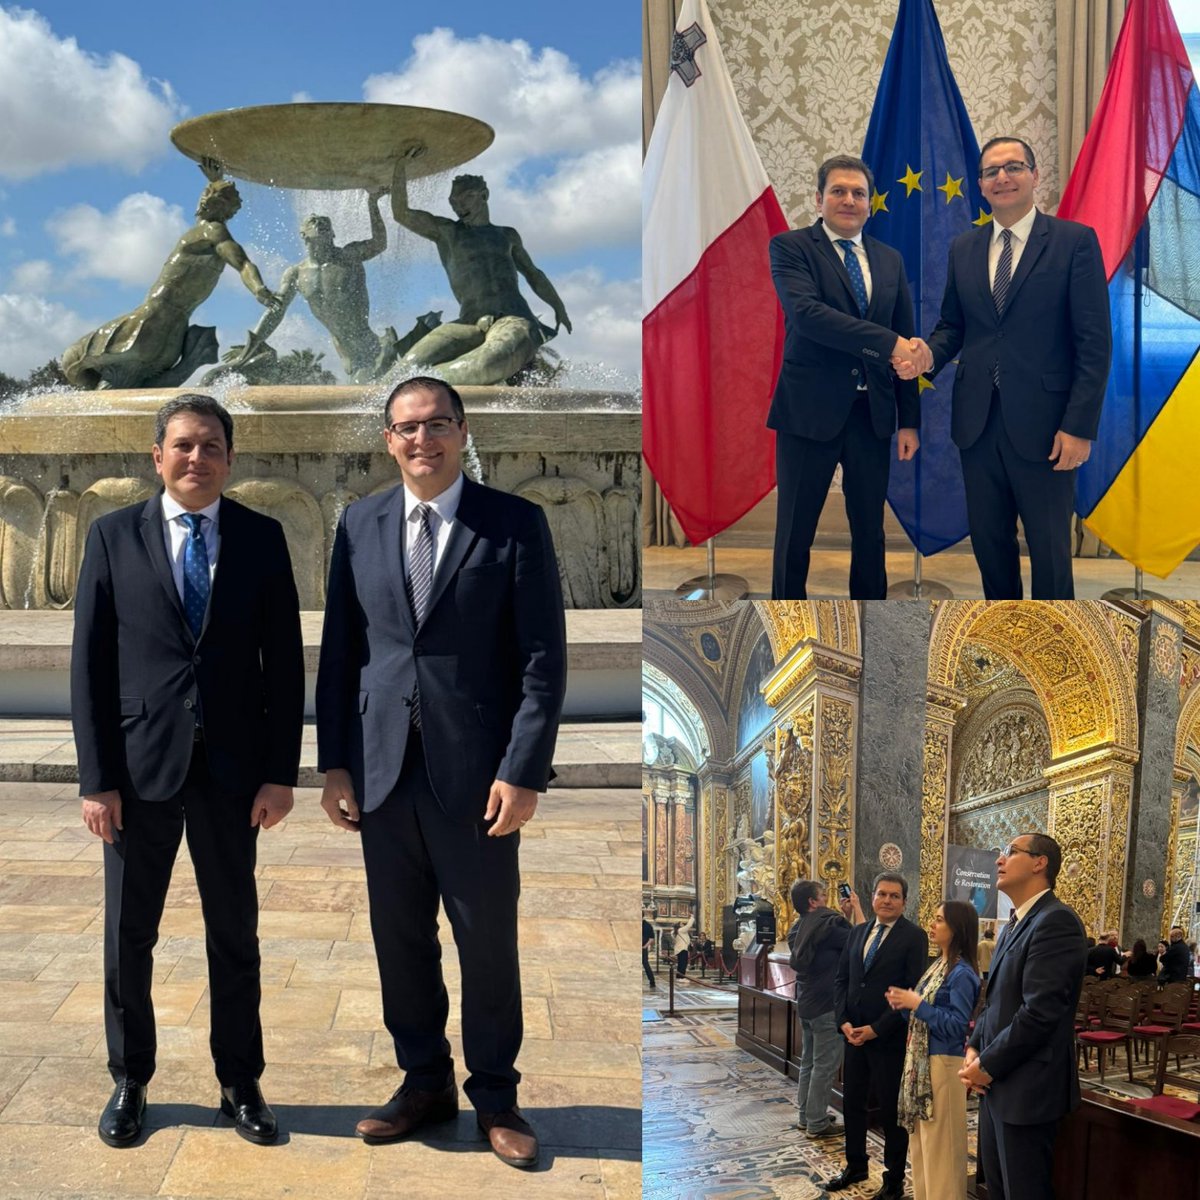 Welcomed Deputy Minister at @MFAofArmenia @ParuyrPh for the first session of political consultations between Malta & Armenia 🇲🇹🇦🇲 We focused on strengthening commercial ties & the situation in South Caucasus, in view of MT's role as Chair-in-Office at the @OSCE @MFETMalta